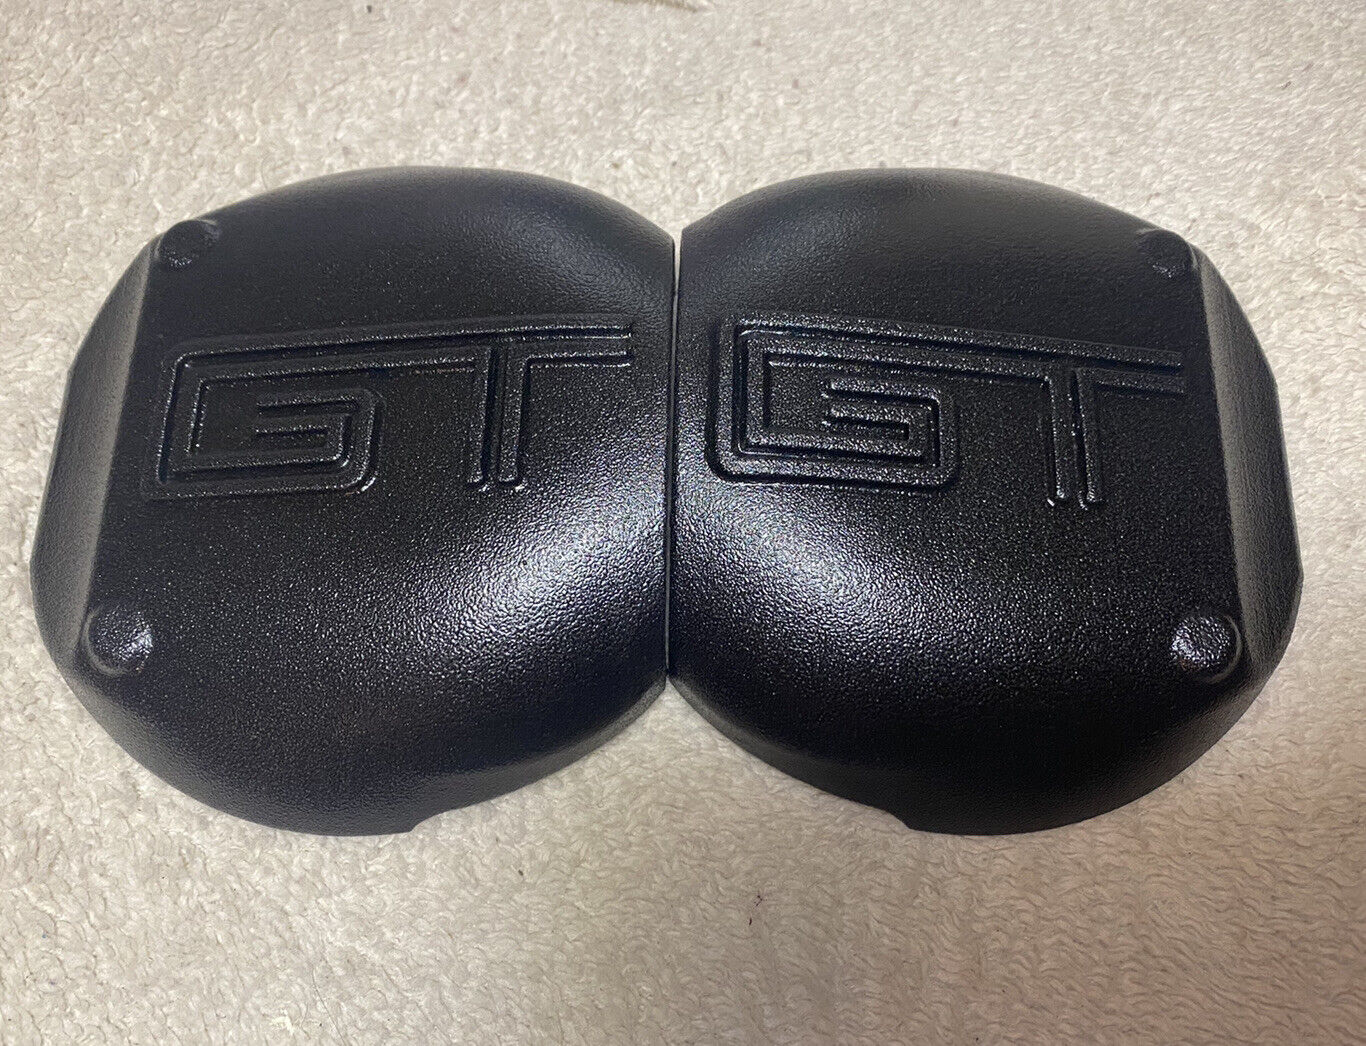 05-14 Mustang Strut Tower Covers Caps (GT) custom fitted to your setup